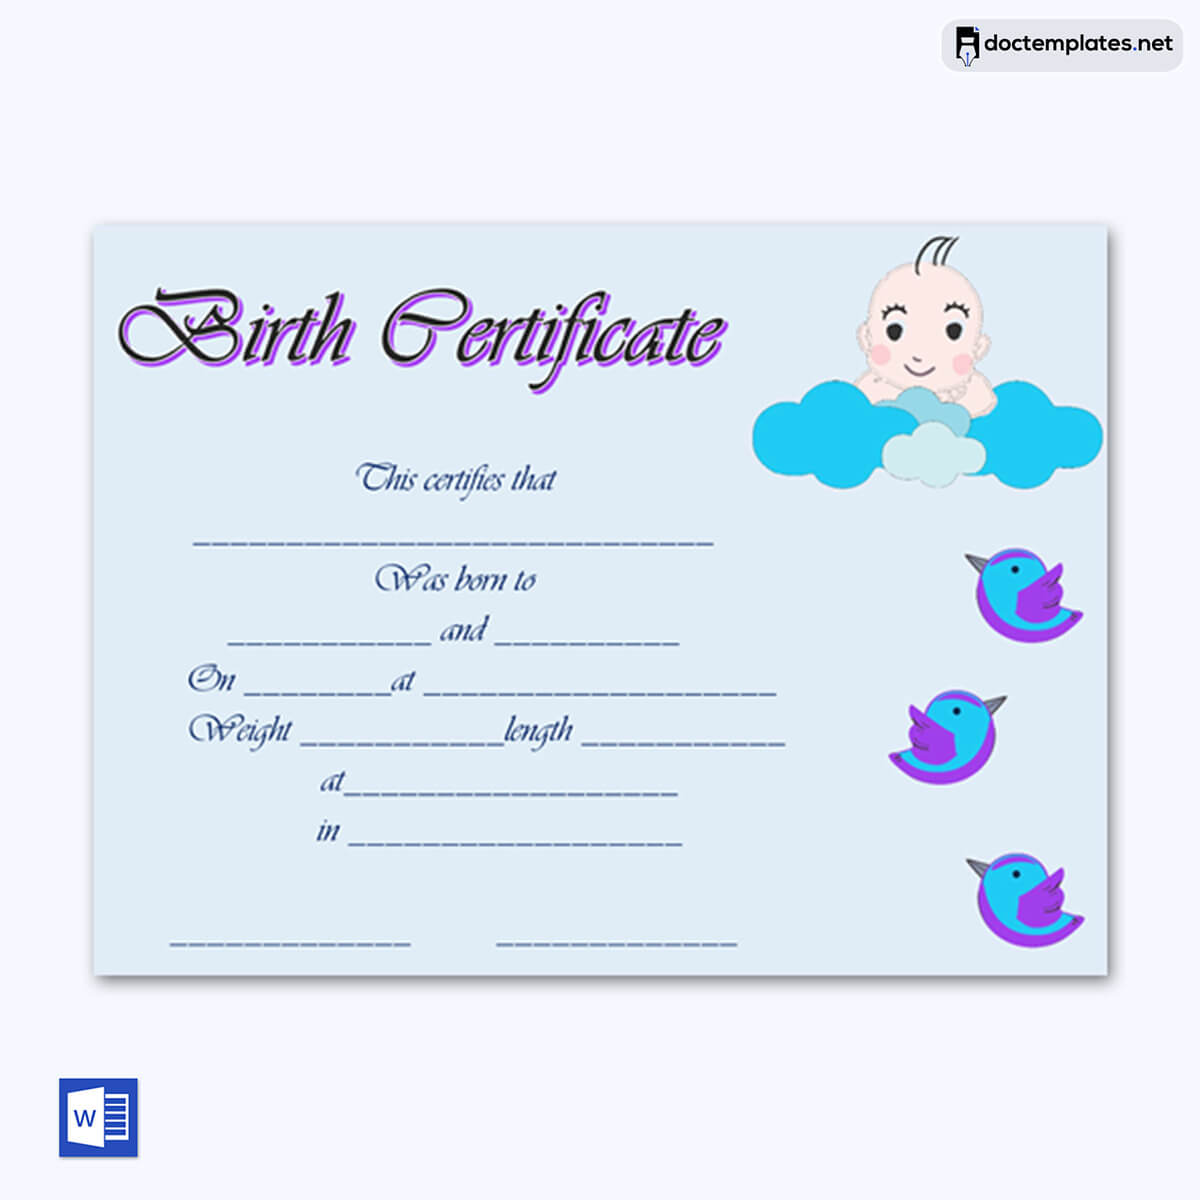 Image of Free birth certificate template
Free birth certificate template
05